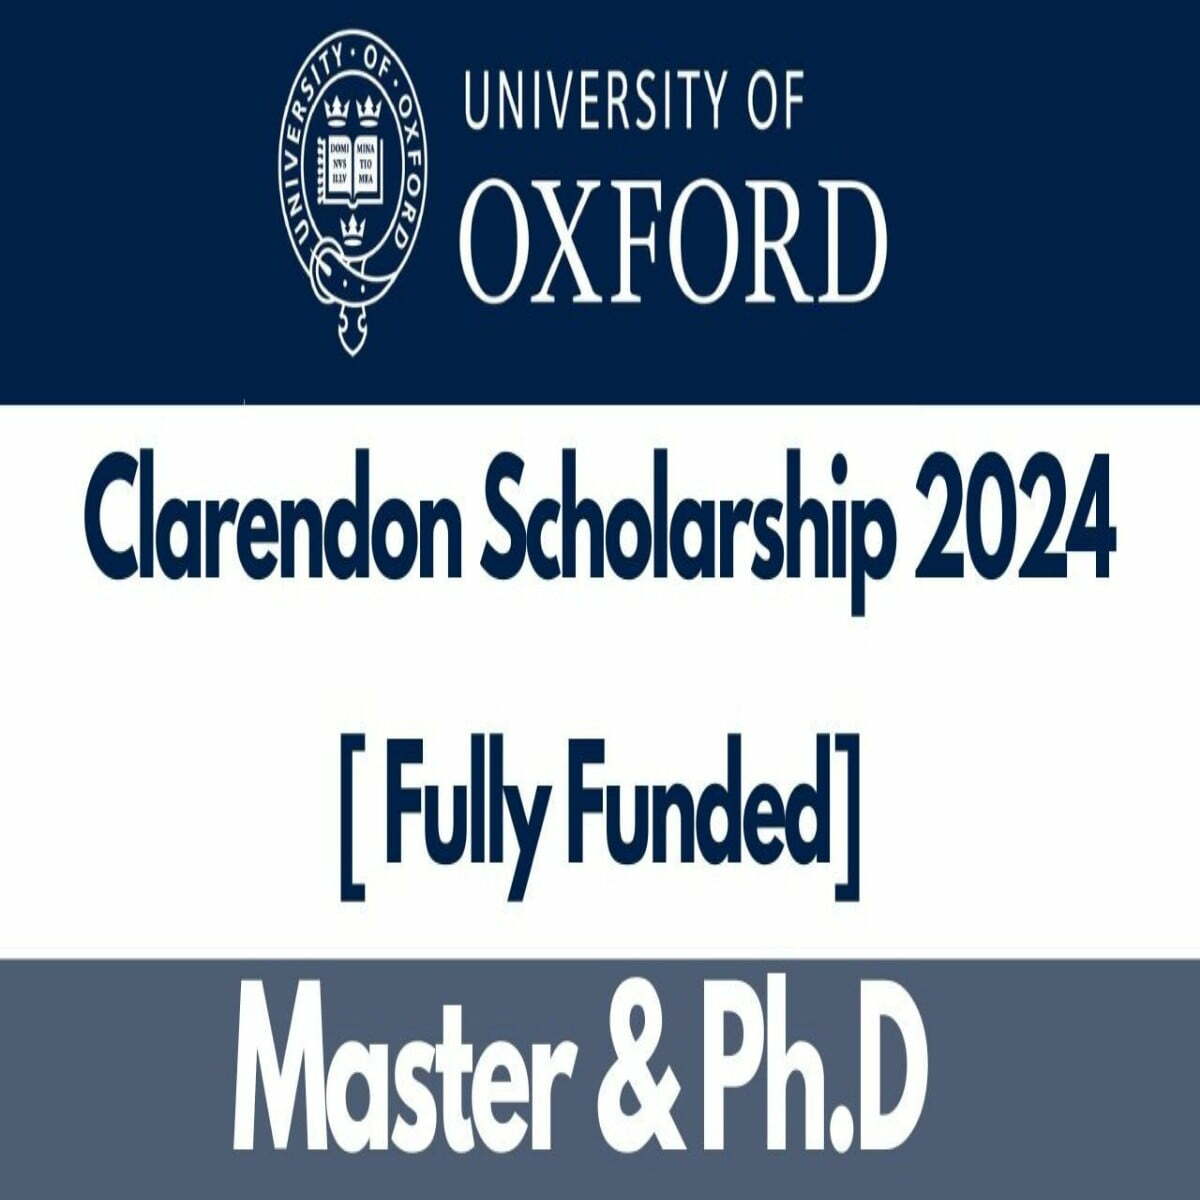 Clarendon Scholarships 2024/2025 at University of Oxford